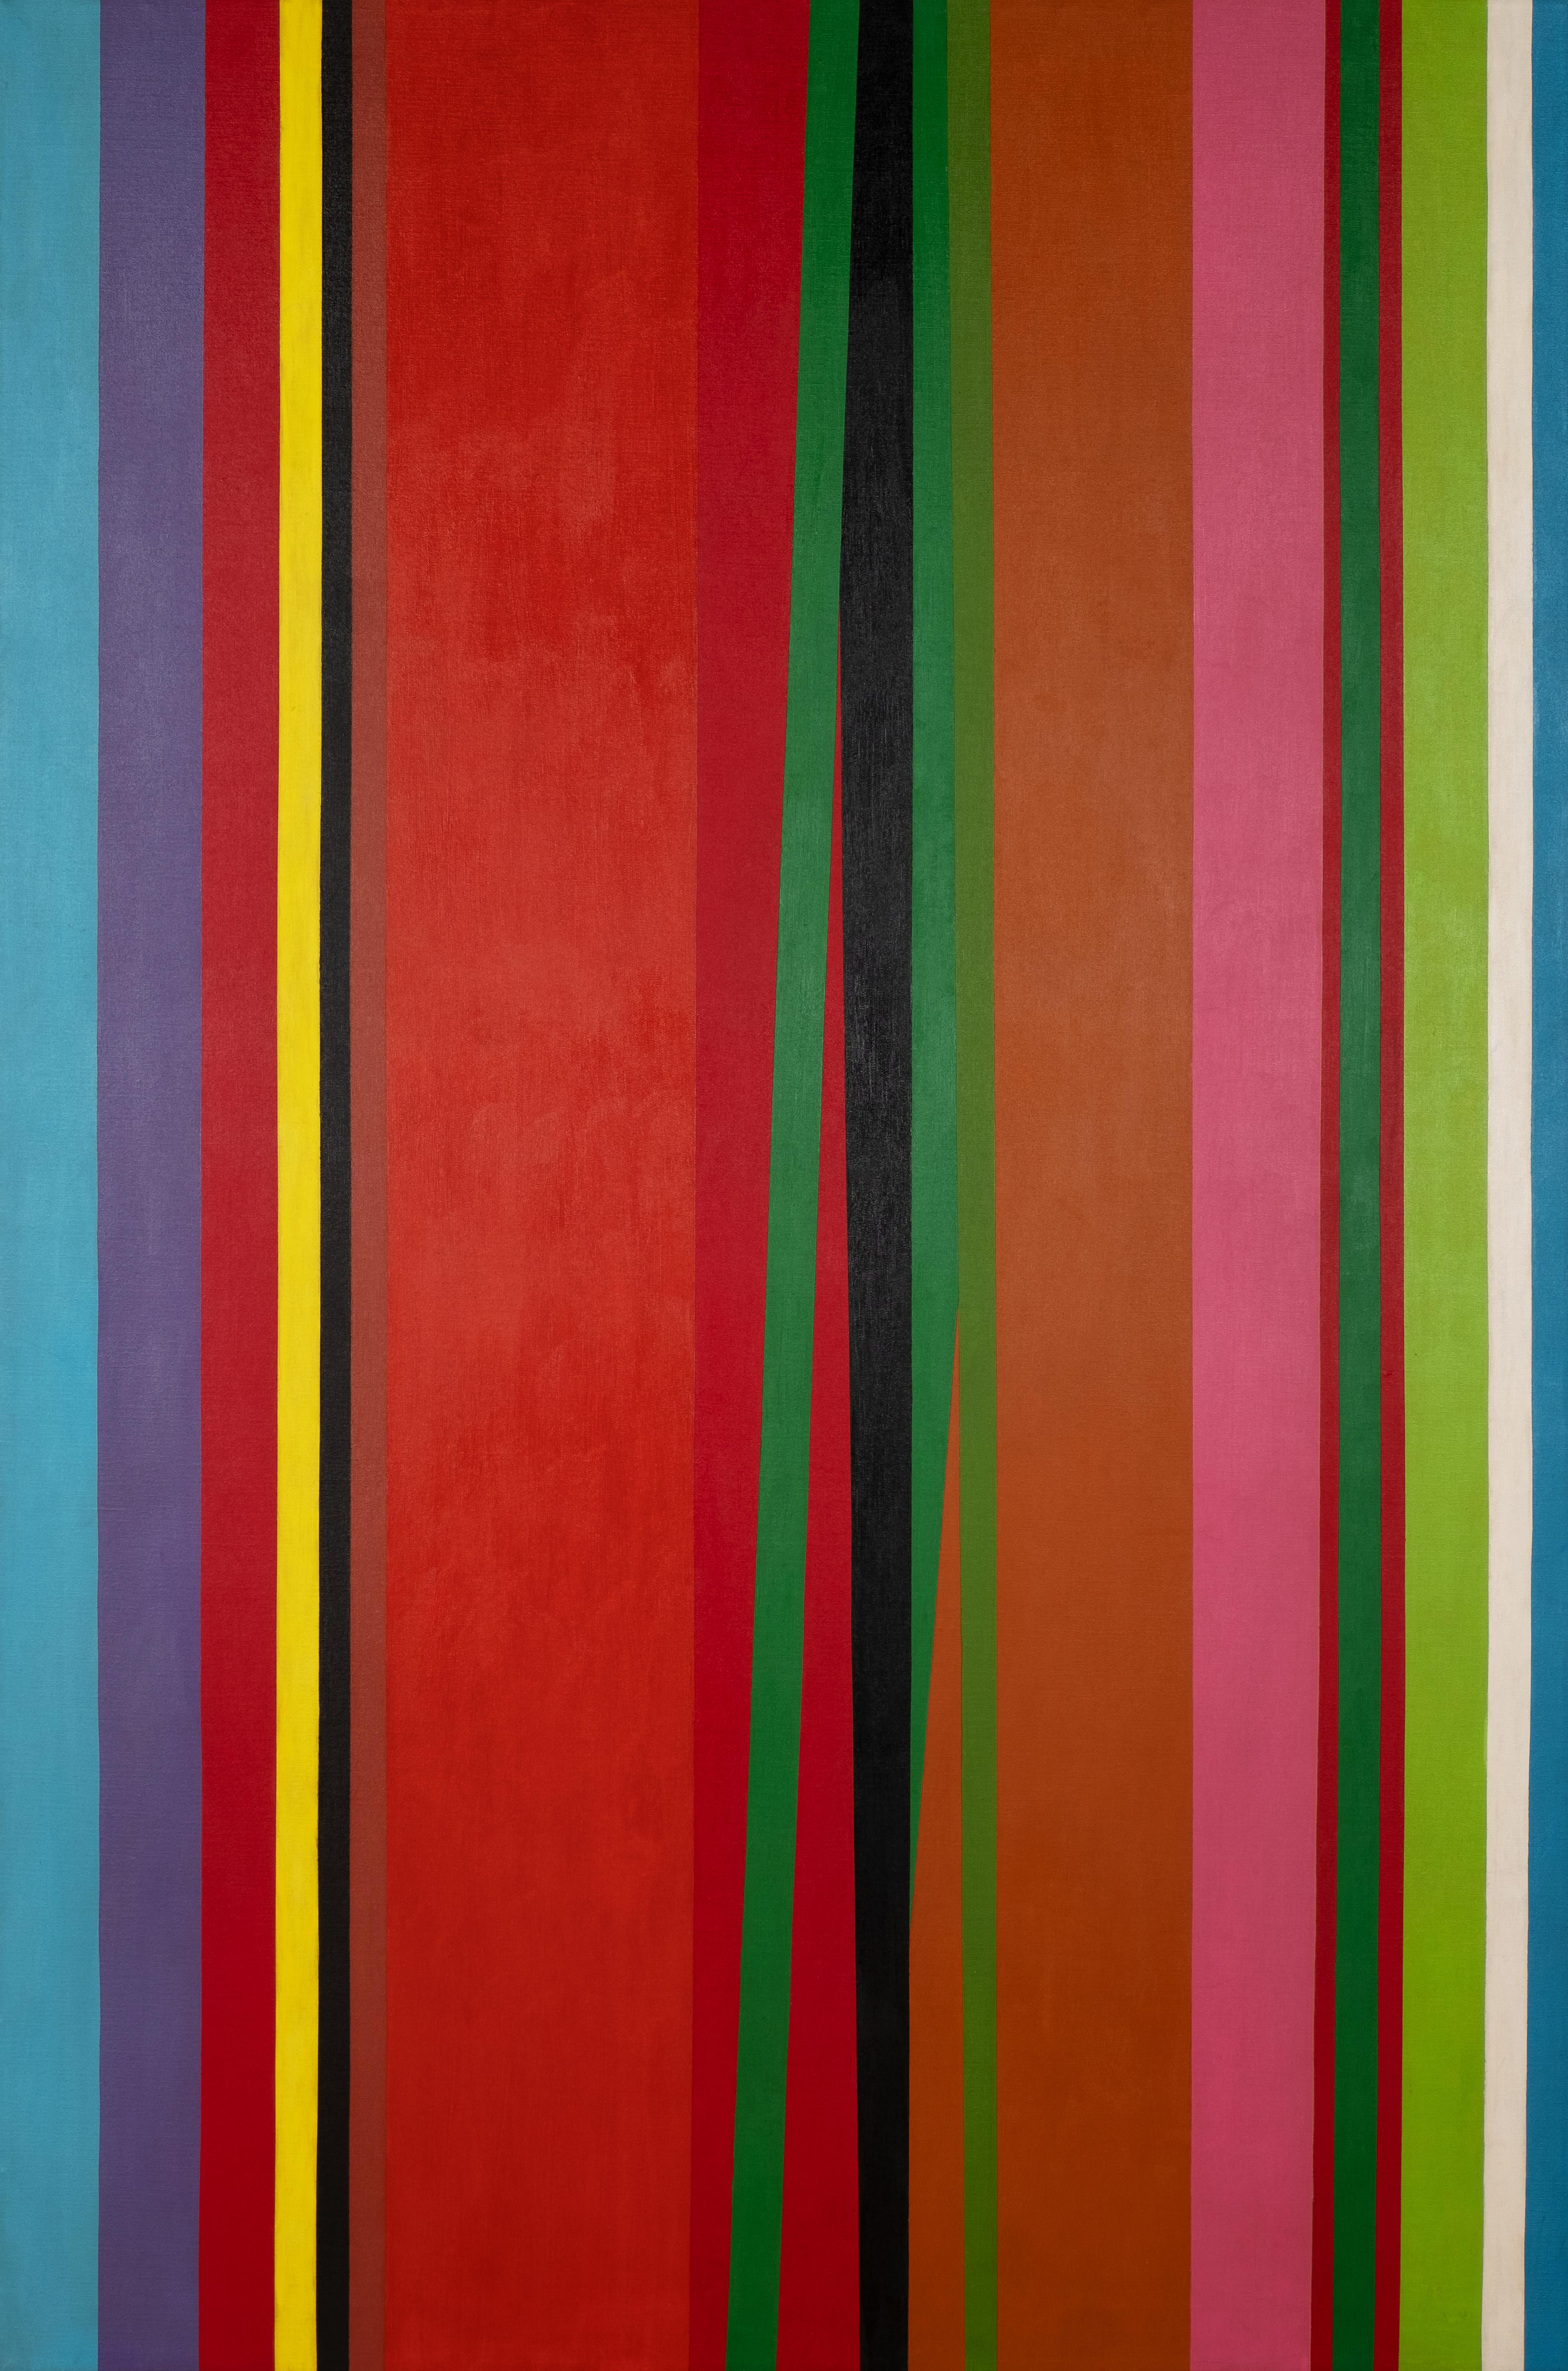 Catch, striped hard edge abstraction - Painting by Jay Rosenblum